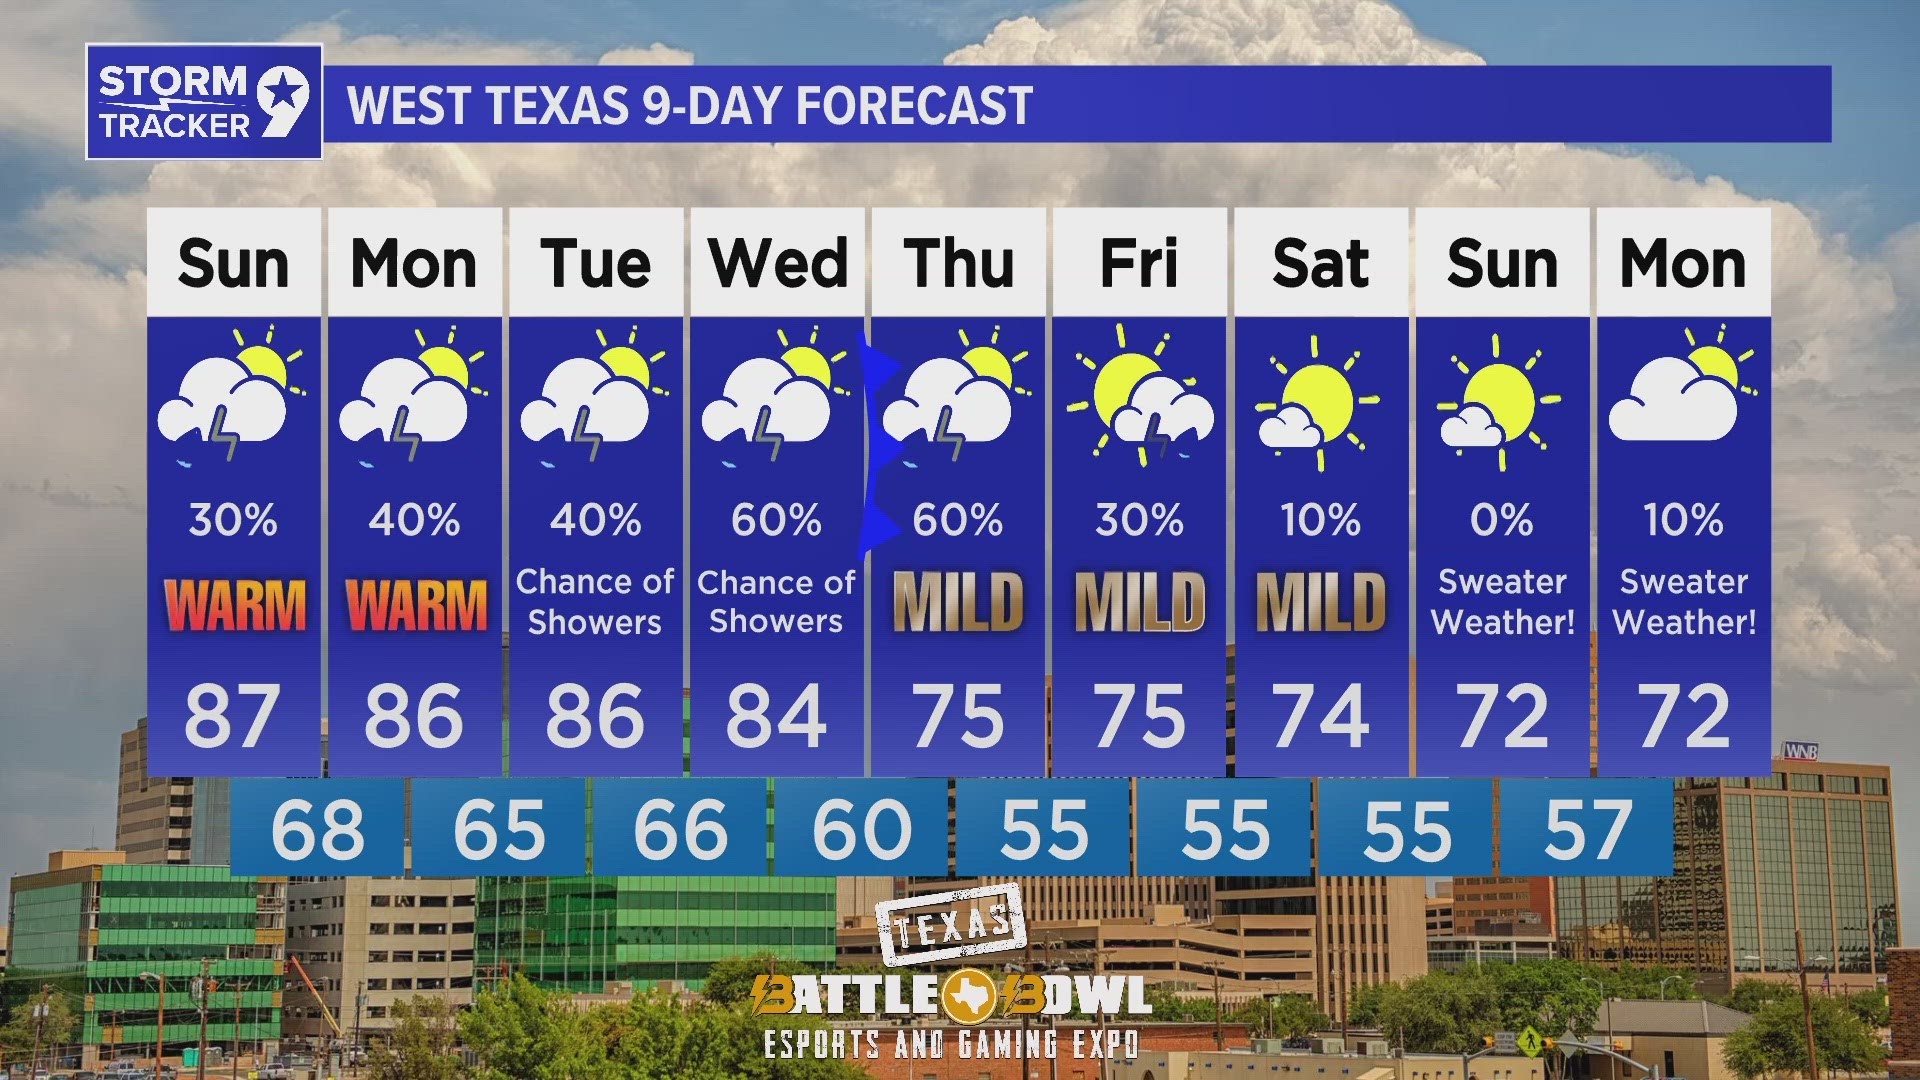 rain chances and cooler weather